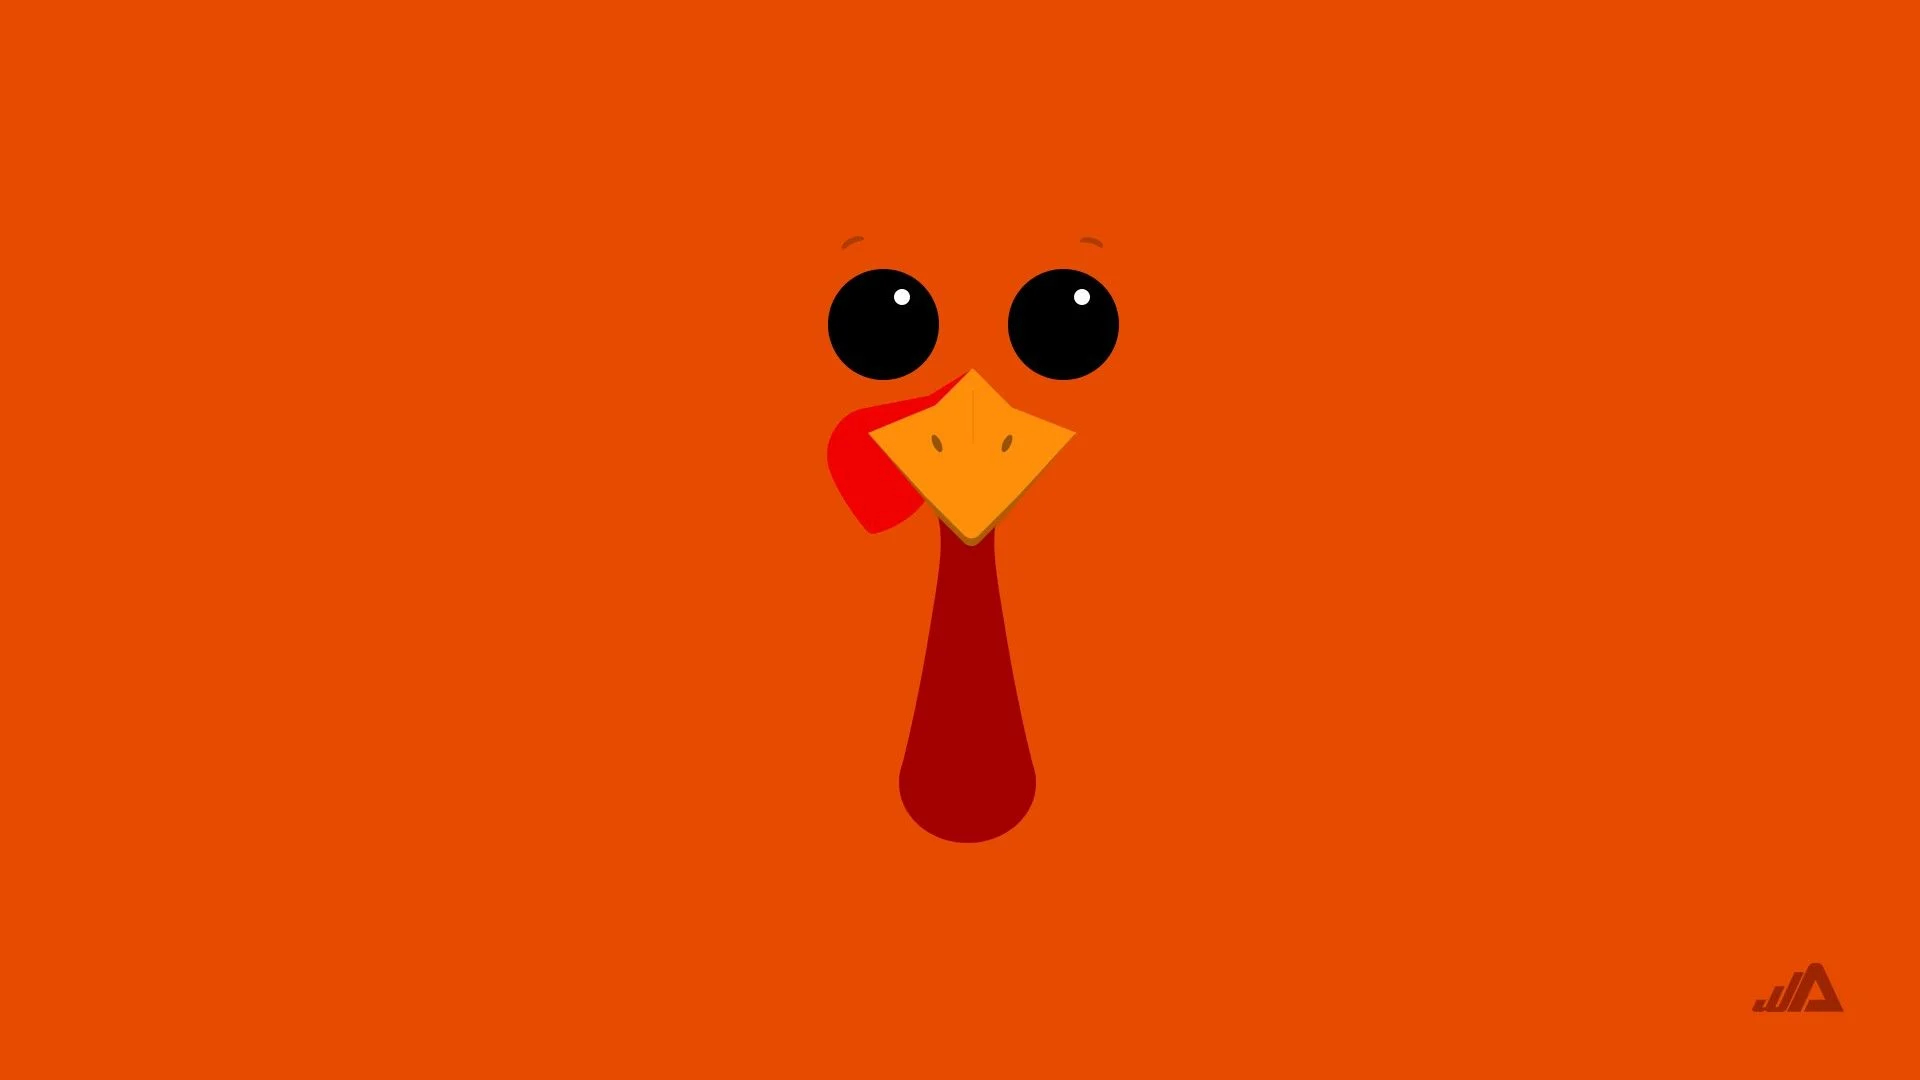 1920x1080 Thanksgiving Turkey Wallpapers Top Free Thanksgiving Turkey Backgrounds